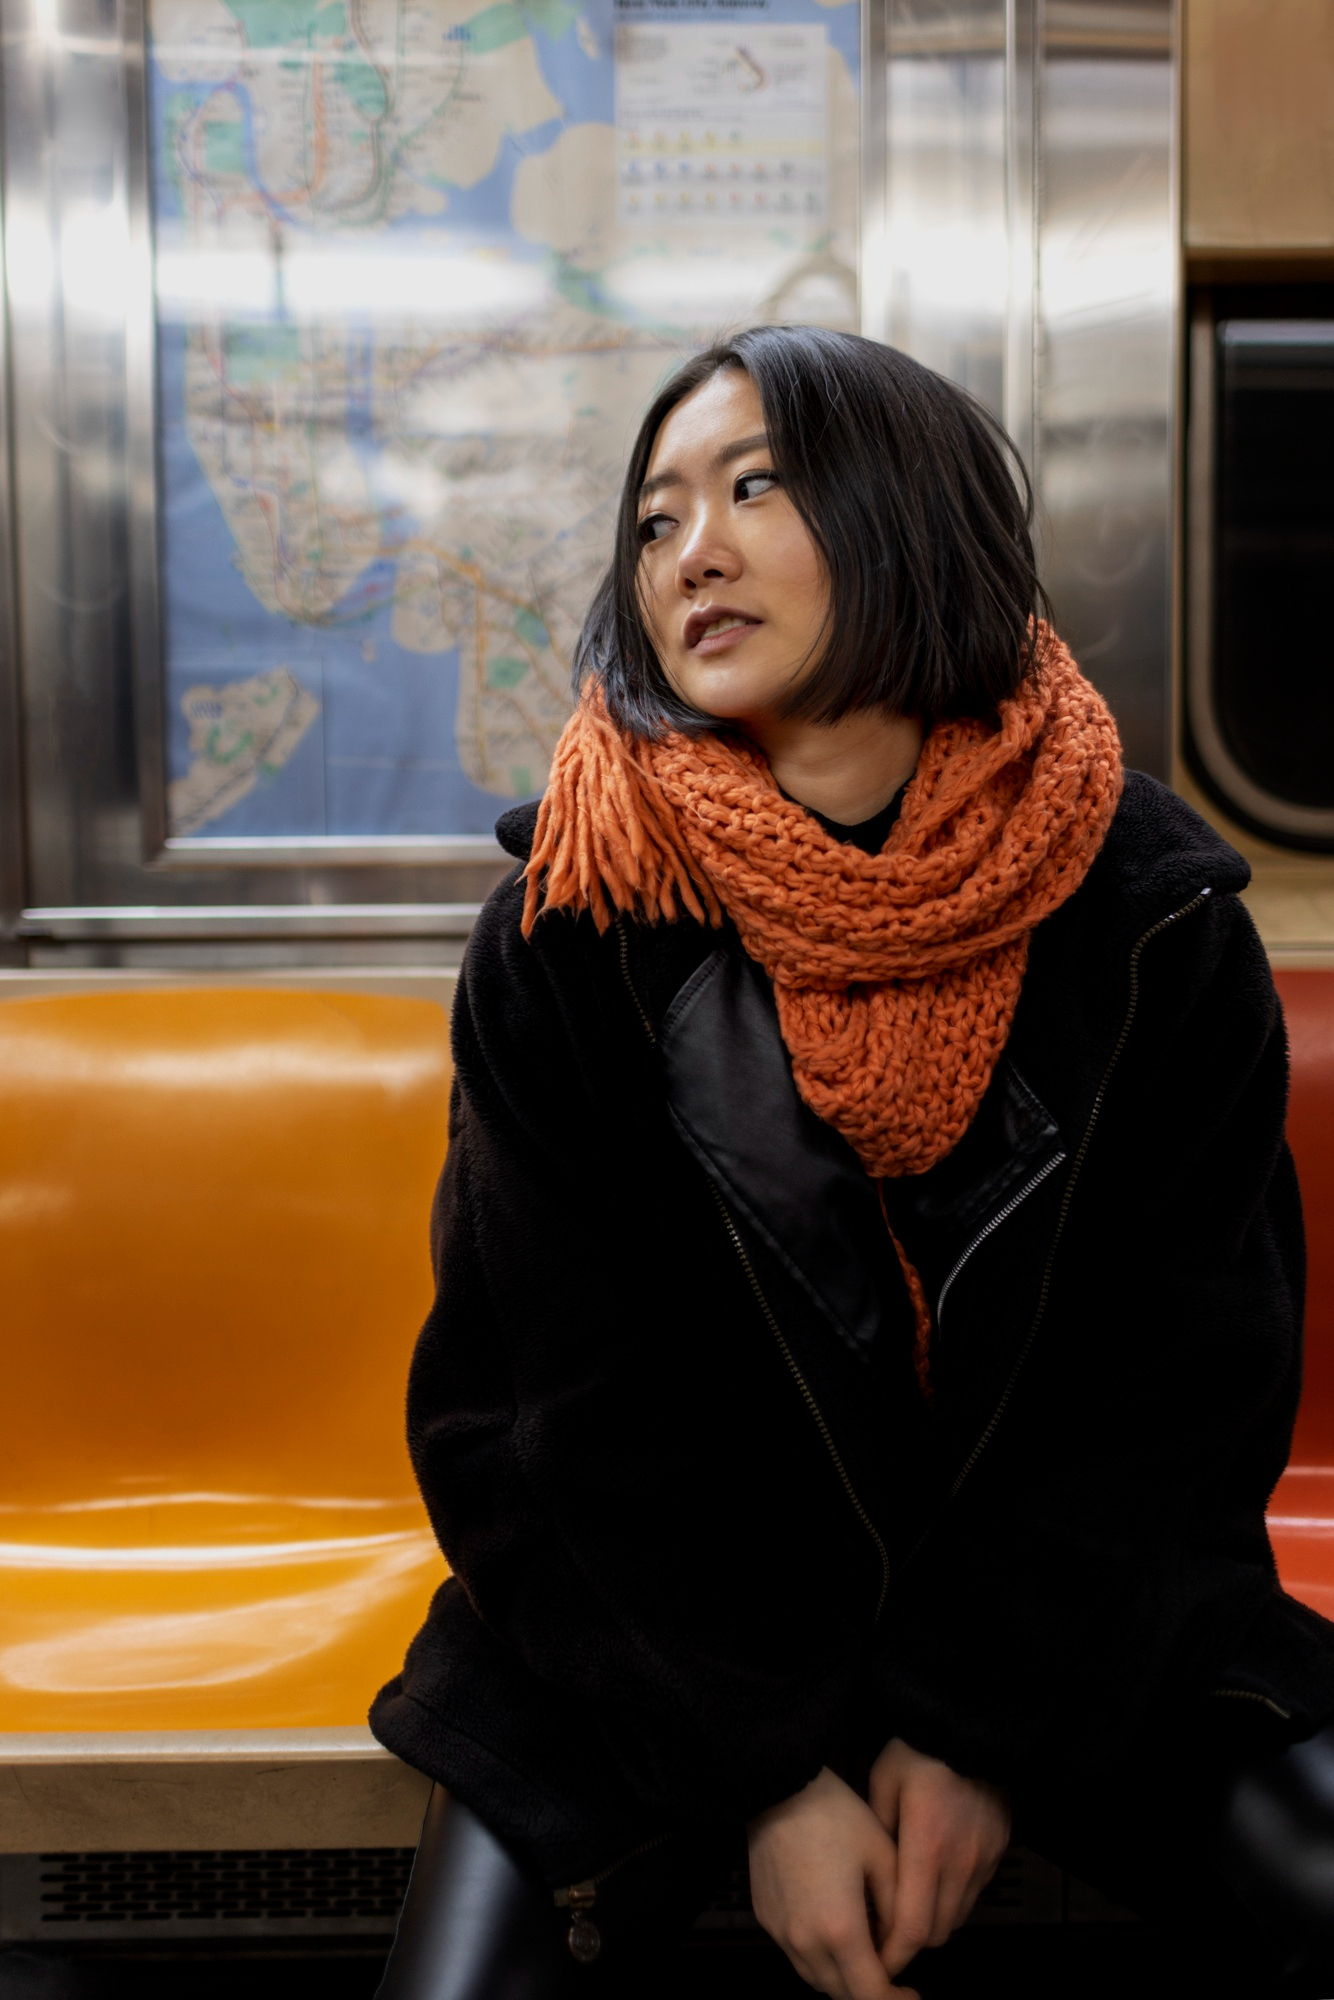 An embarrassed woman in the subway | Source: Freepik